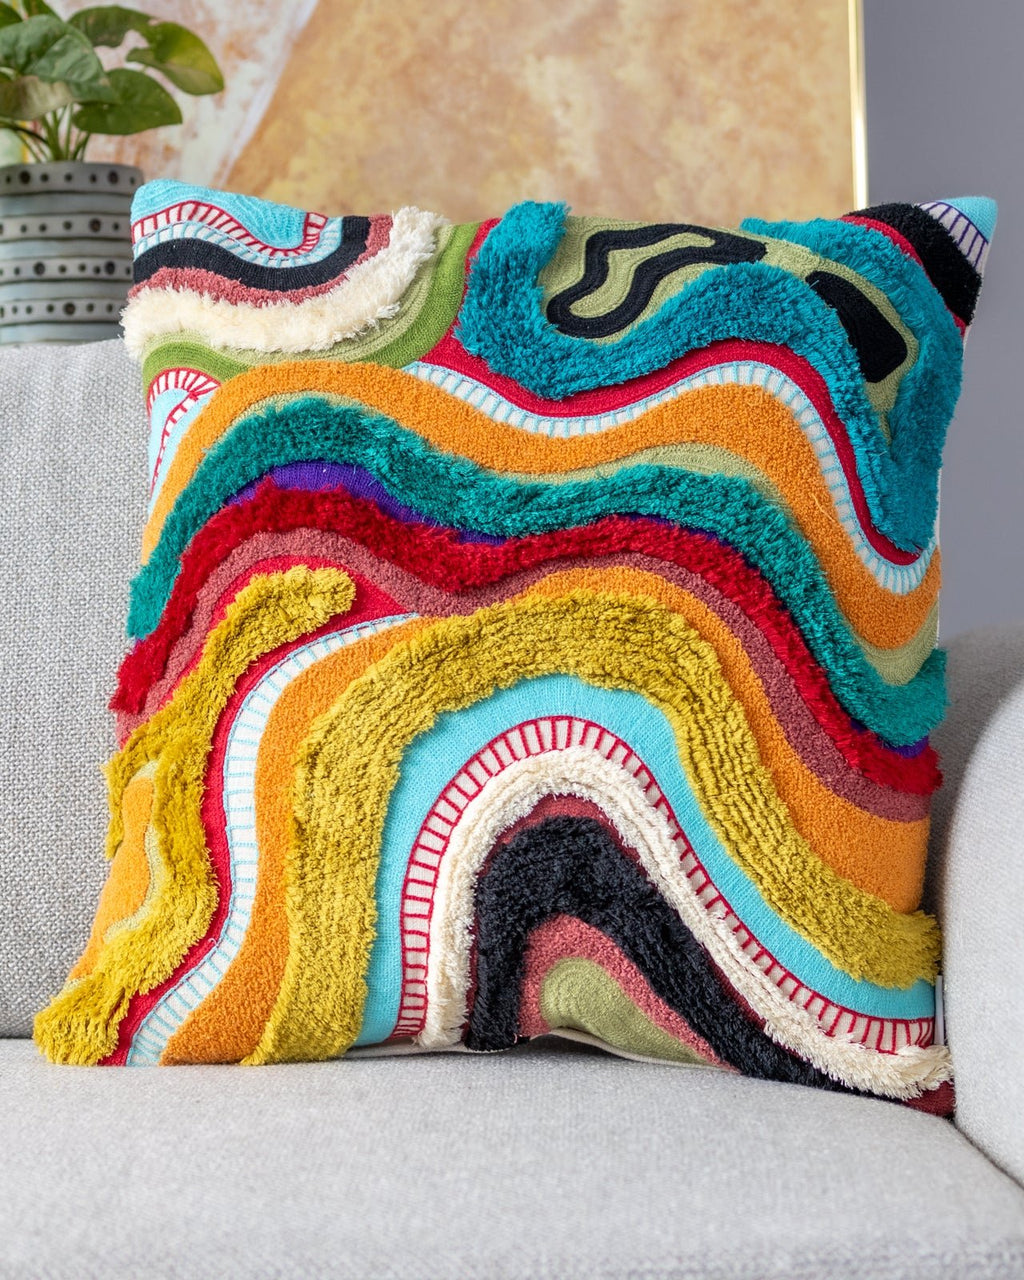 Needlepoint Pillows by Bruce